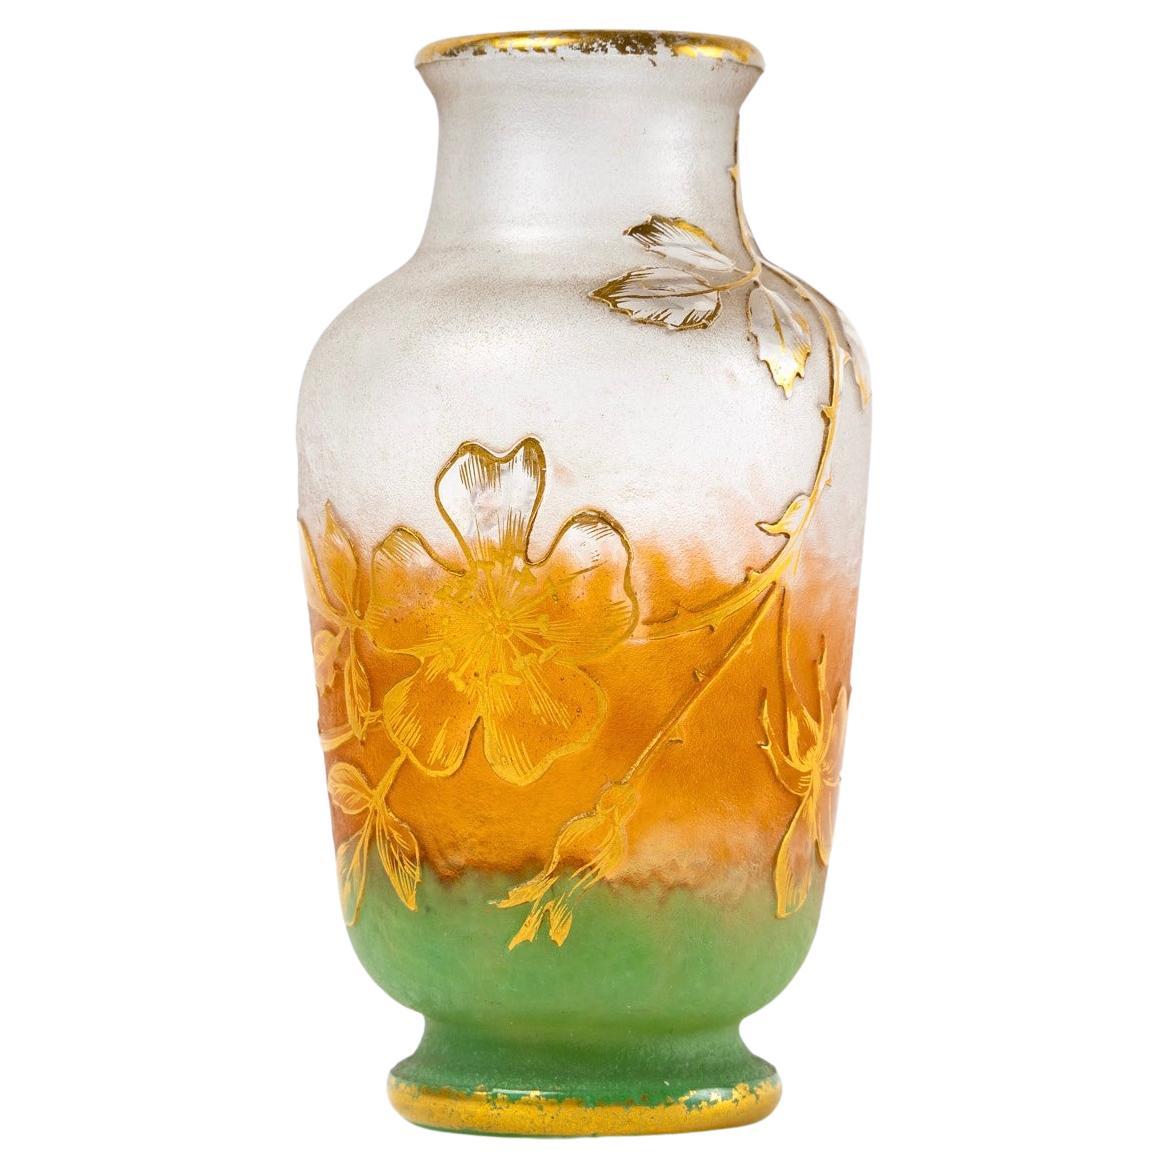 Daum Nancy, Vase Acid Etched Glass Flowers and Butterfly